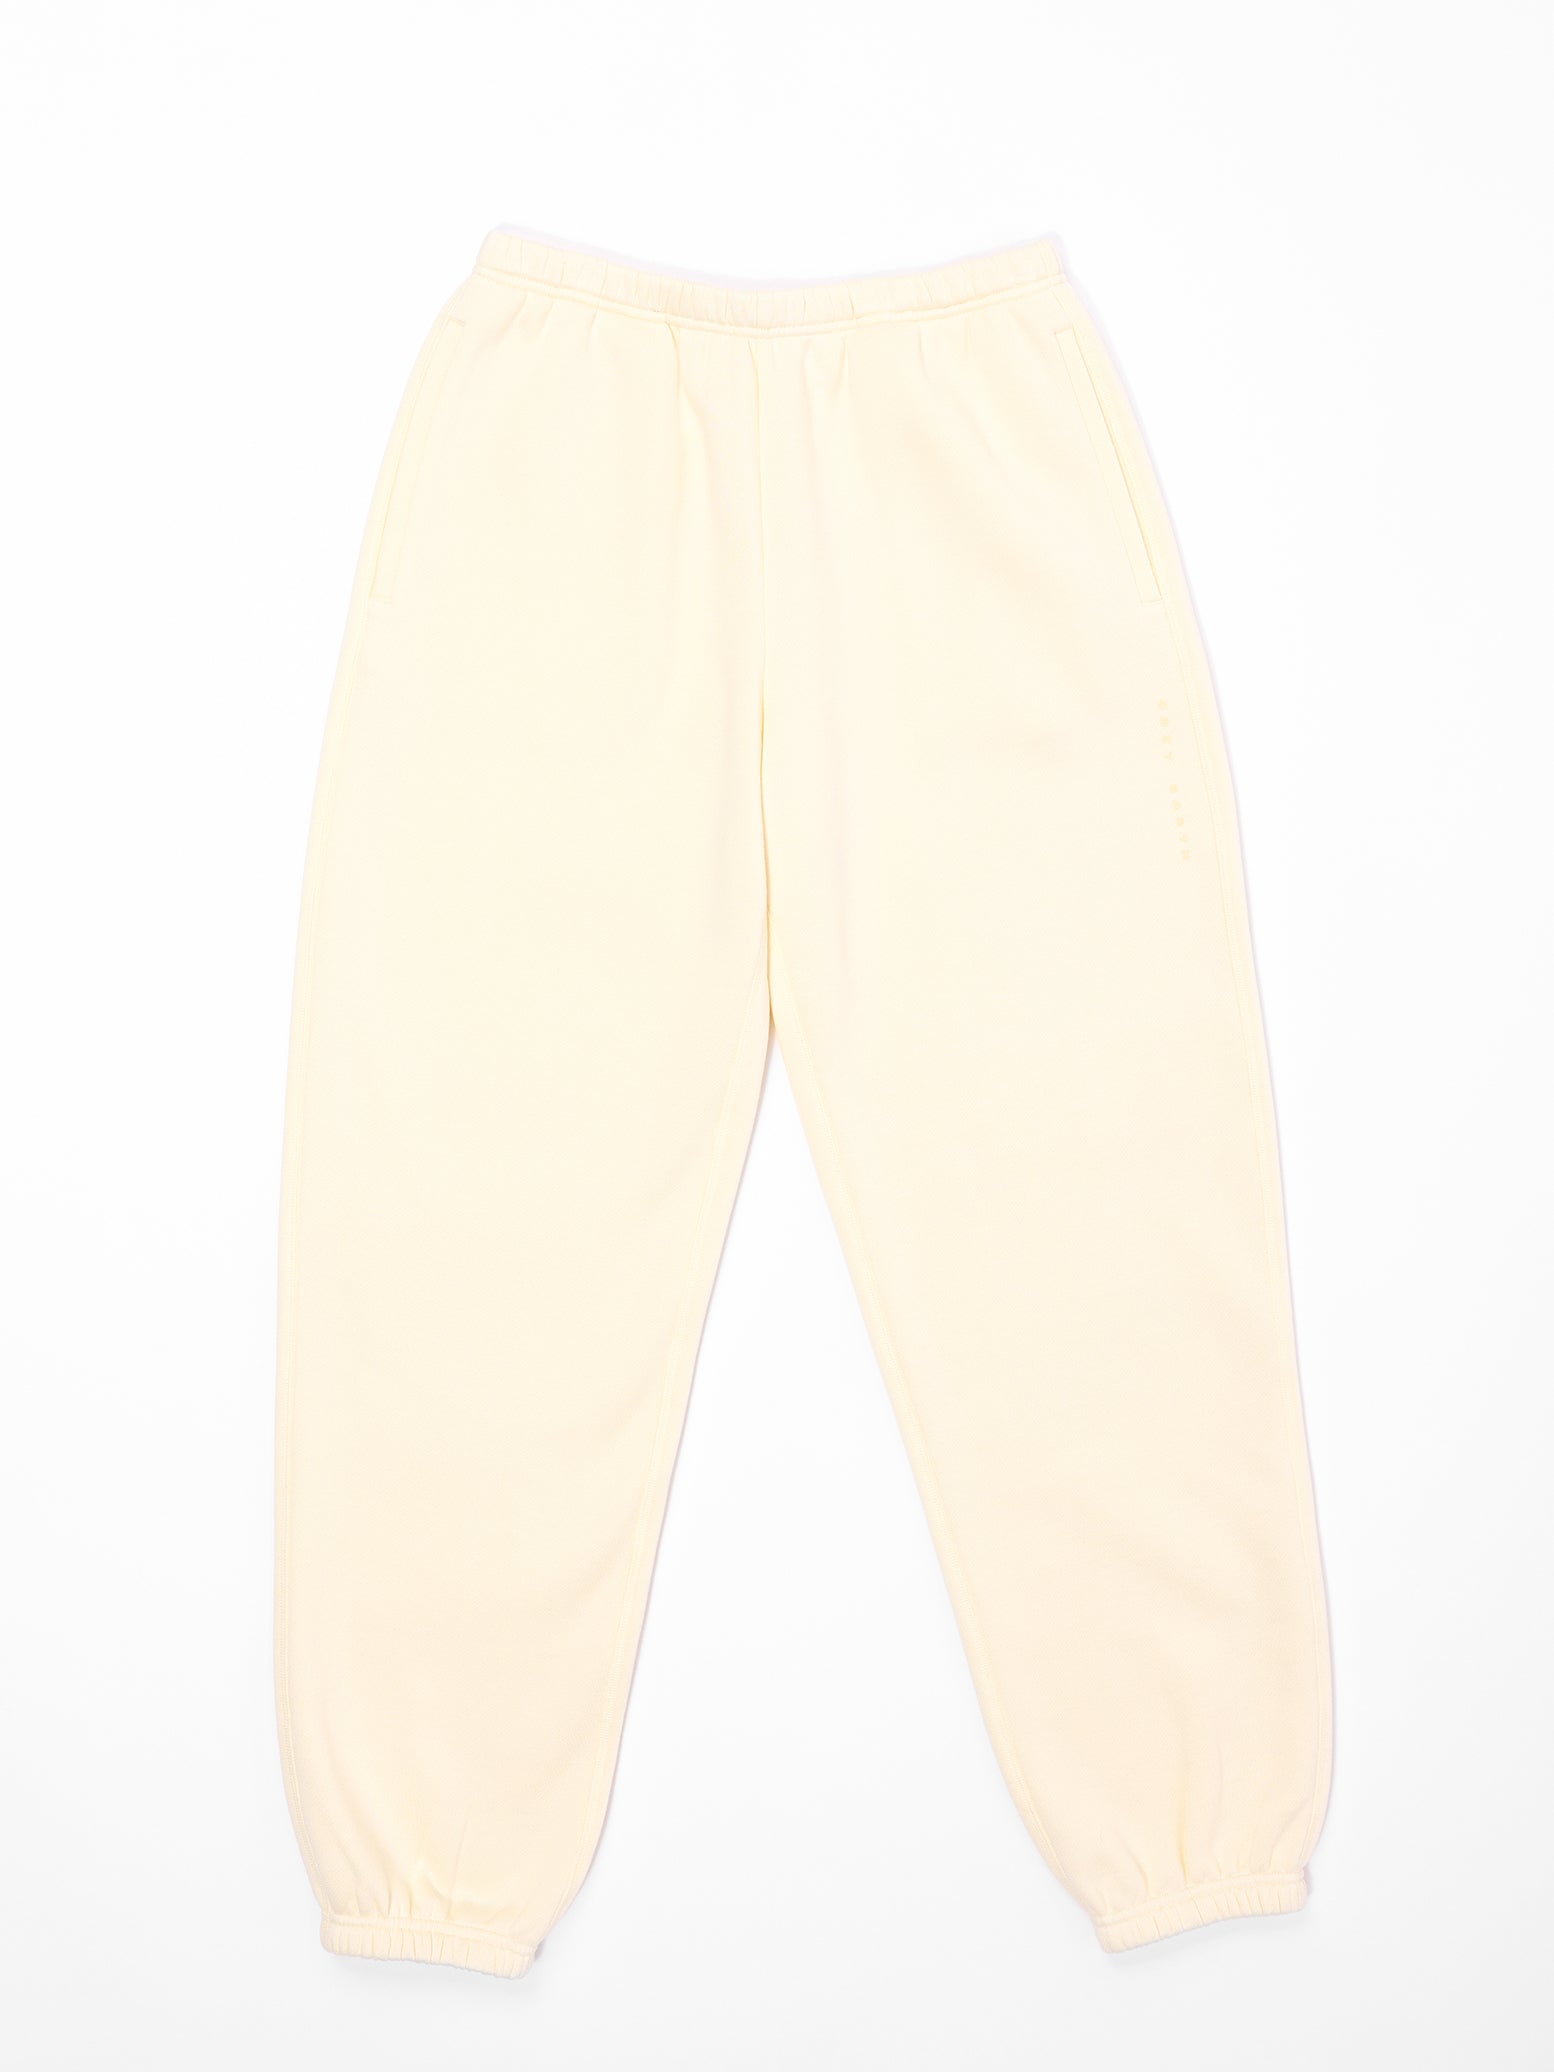 Lemonade CityScape Joggers. The Joggers are laying flat over a white background. 